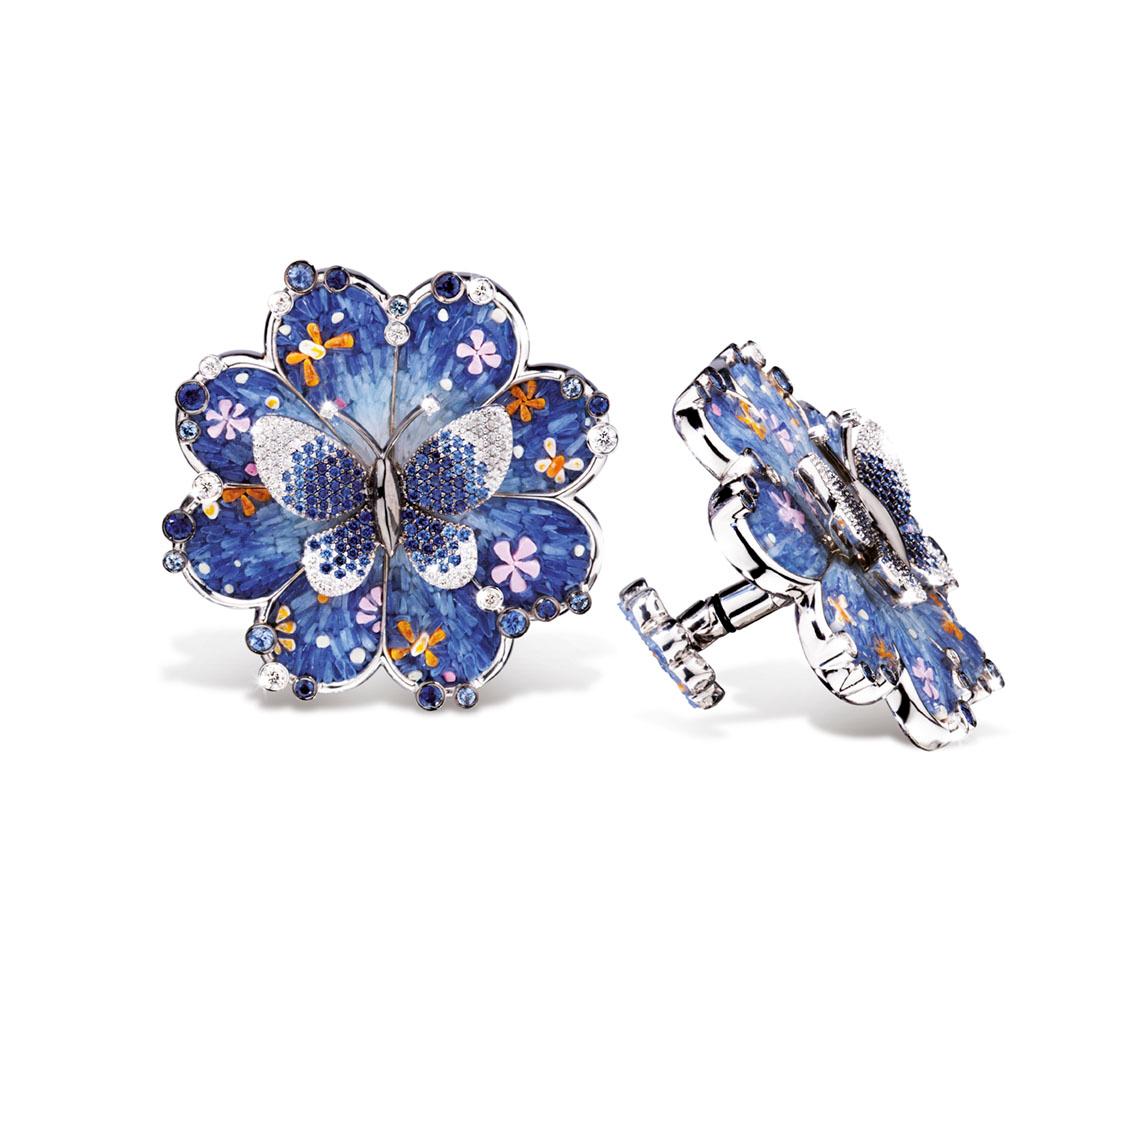 Romantic Cuffliks White Gold White Diamonds Sapphires Hand Decorated with Micro Mosaic For Sale